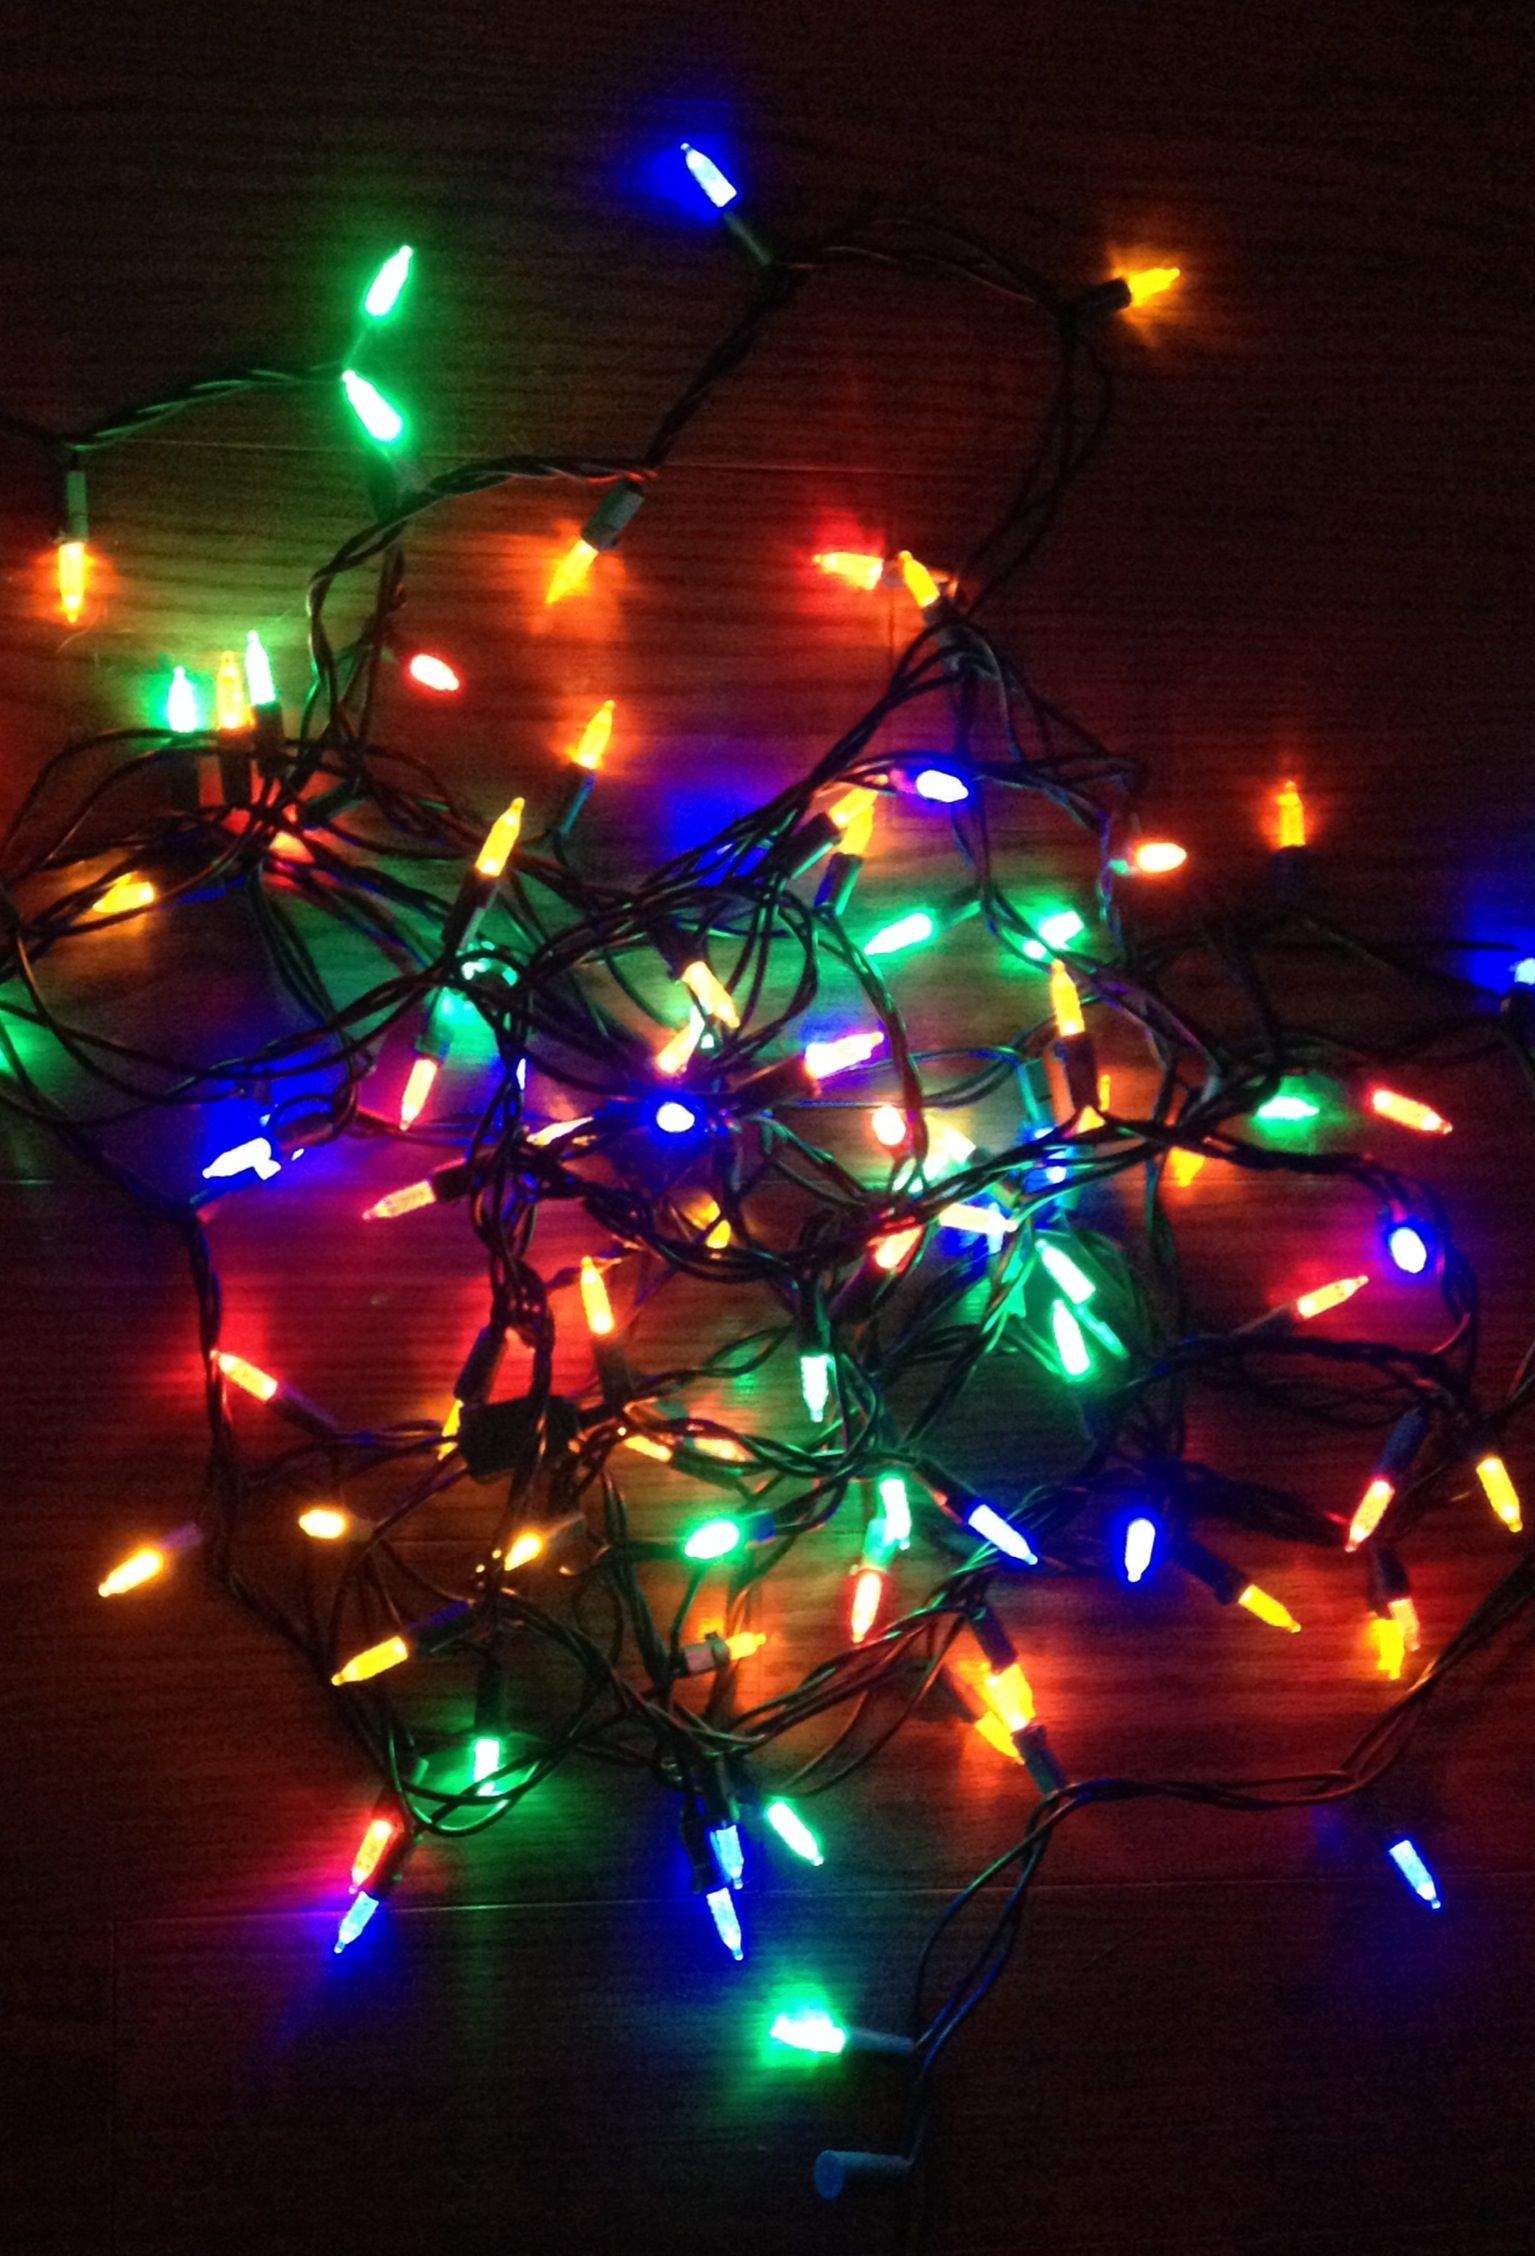 Packing up the Christmas lights. By KimStewart. Christmas lights wallpaper, Christmas, Christmas lights